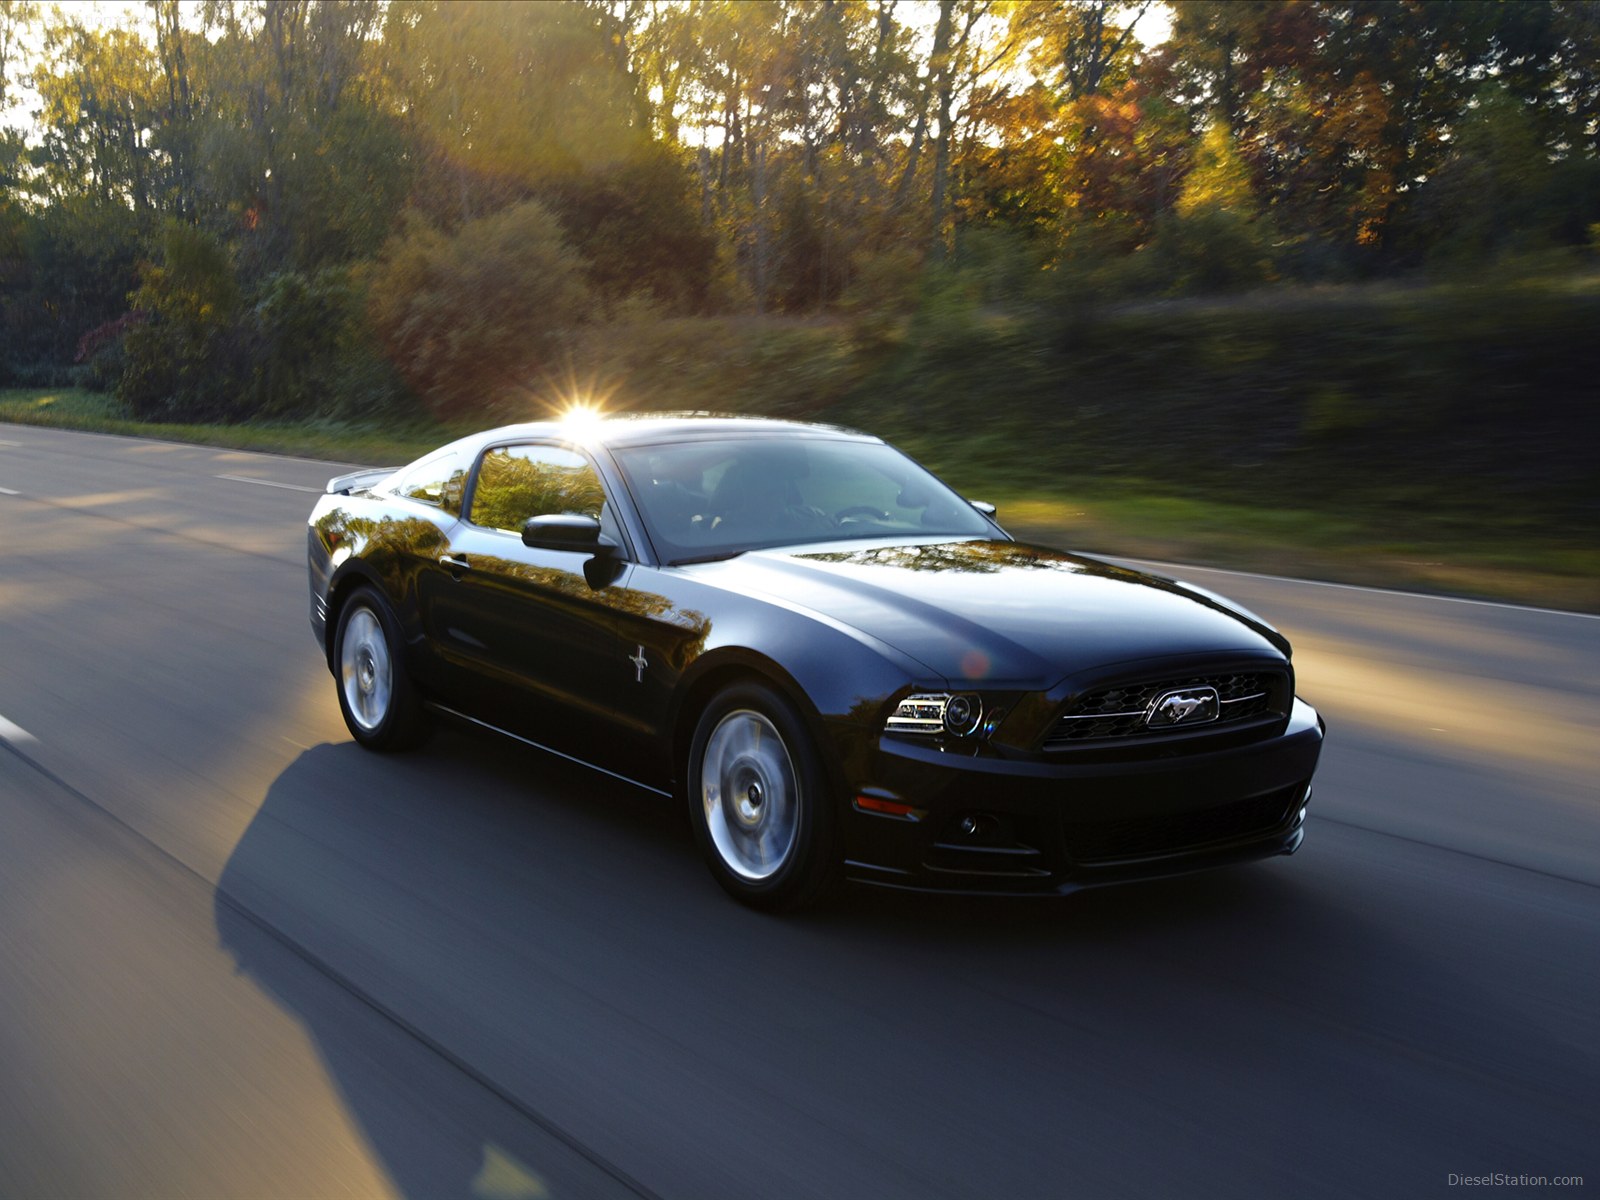 2013 Ford Mustang Gt Black Color Front Angle View Hd - Best Looking 2013 Mustang Gt - HD Wallpaper 